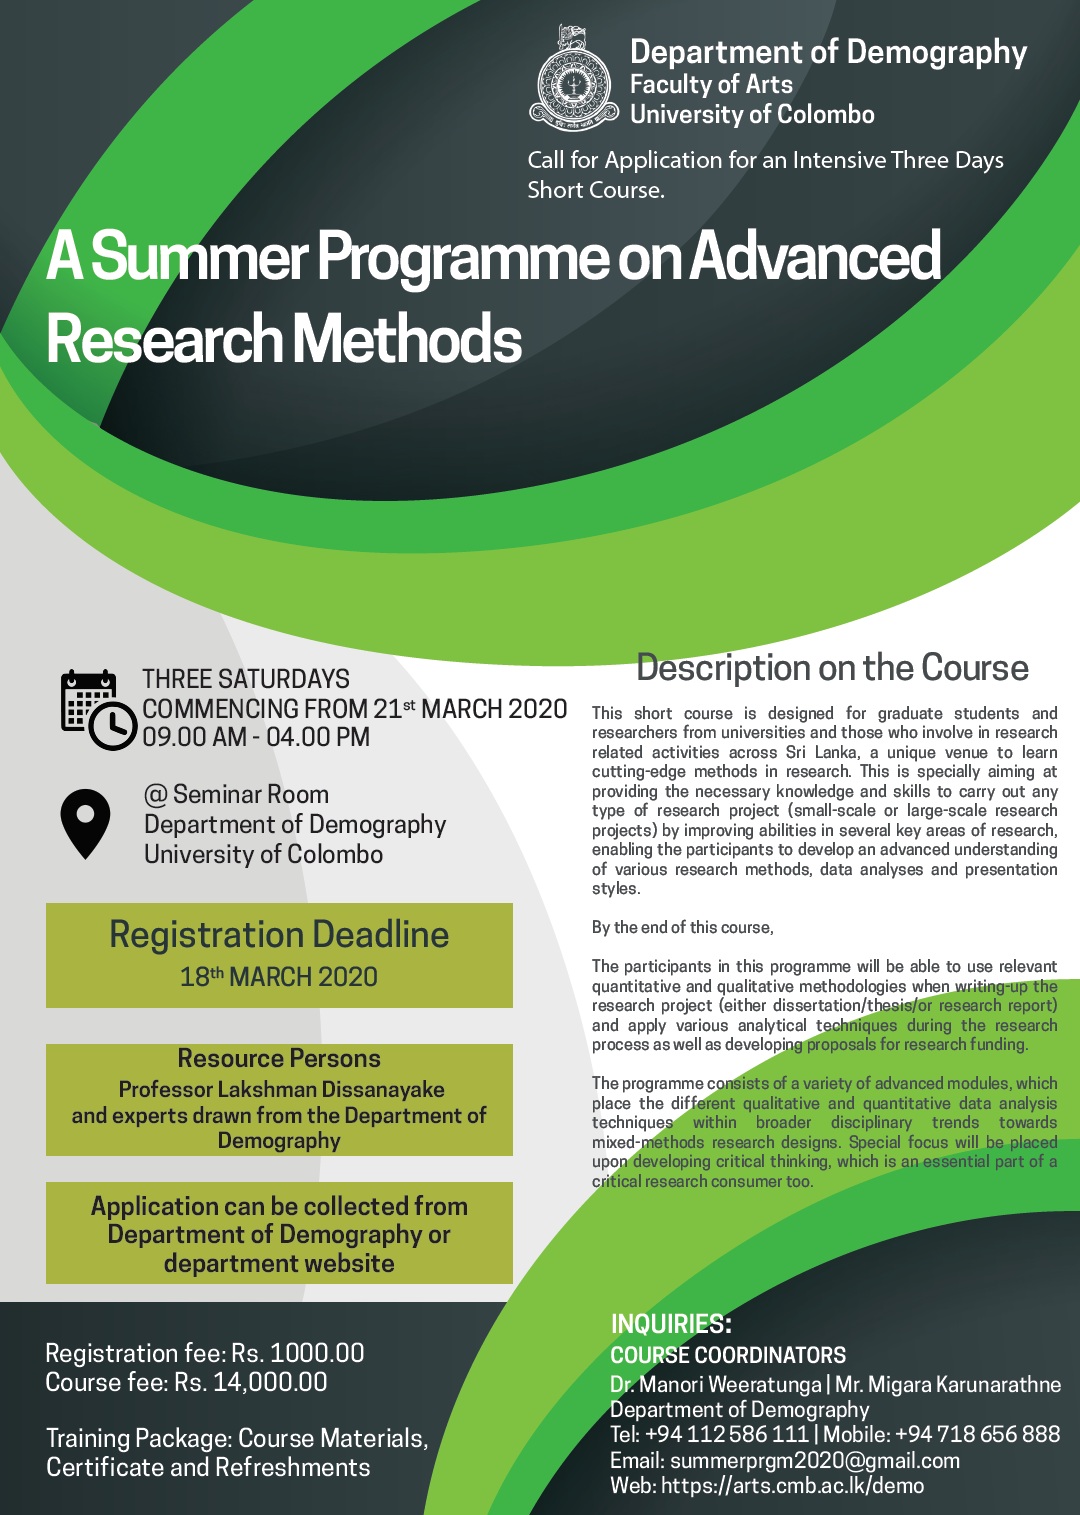 A Summer Programme on Advanced Research Methods